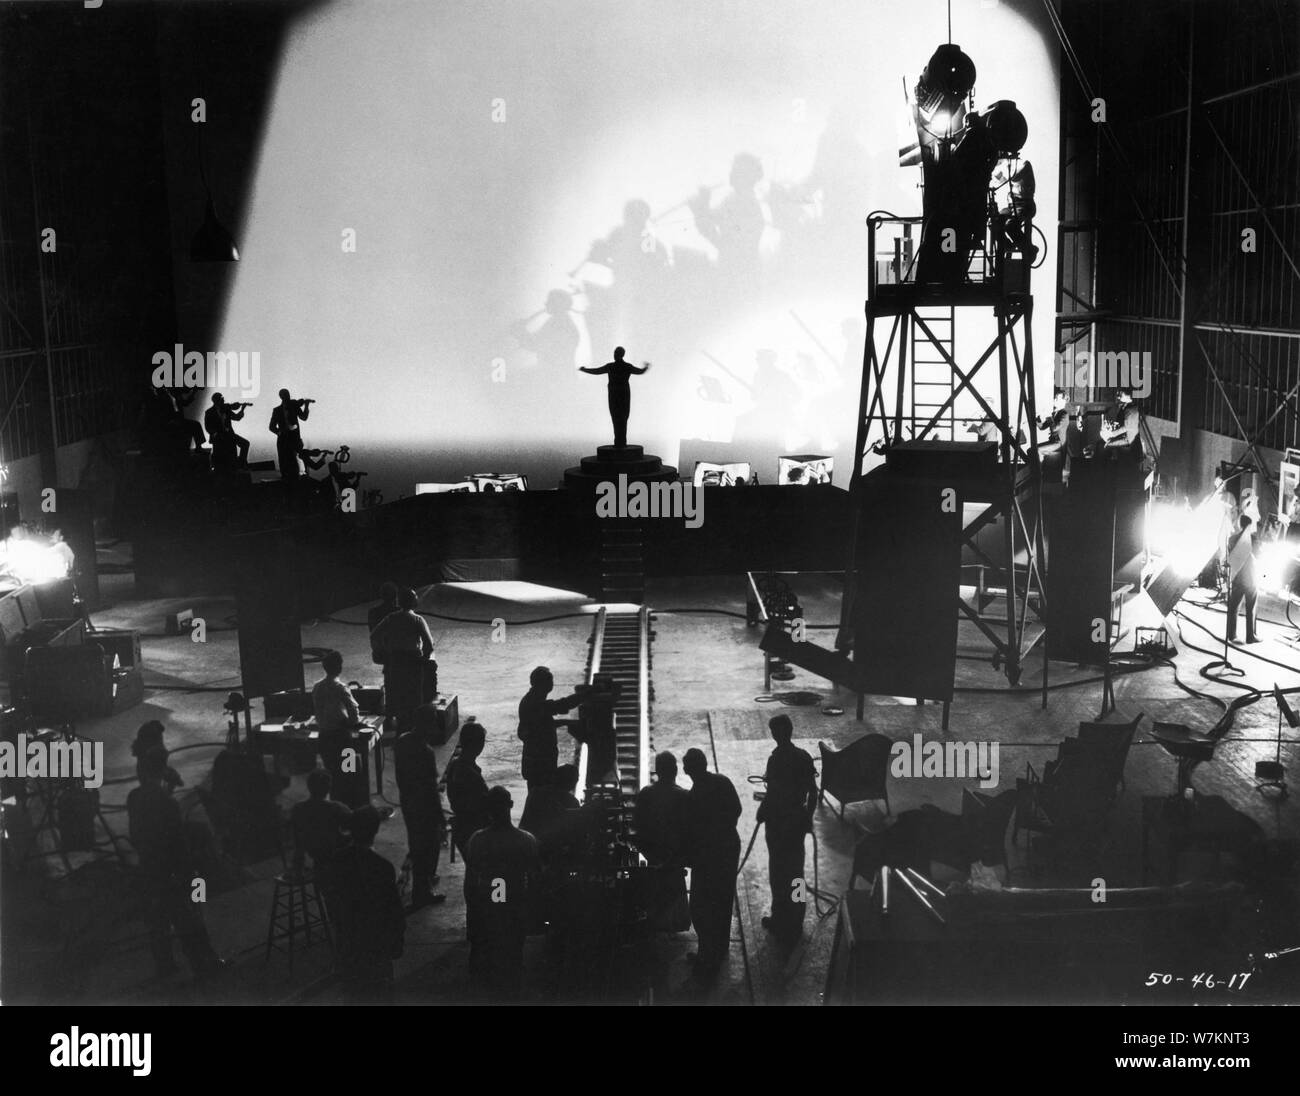 WALT DISNEY FANTASIA 1940 on set candid filming orchestra conducted by Leopold STOKOWSKI live action cinematography by JAMES WONG HOWE Animated Feature Film Walt Disney Productions / RKO Radio Pictures Stock Photo